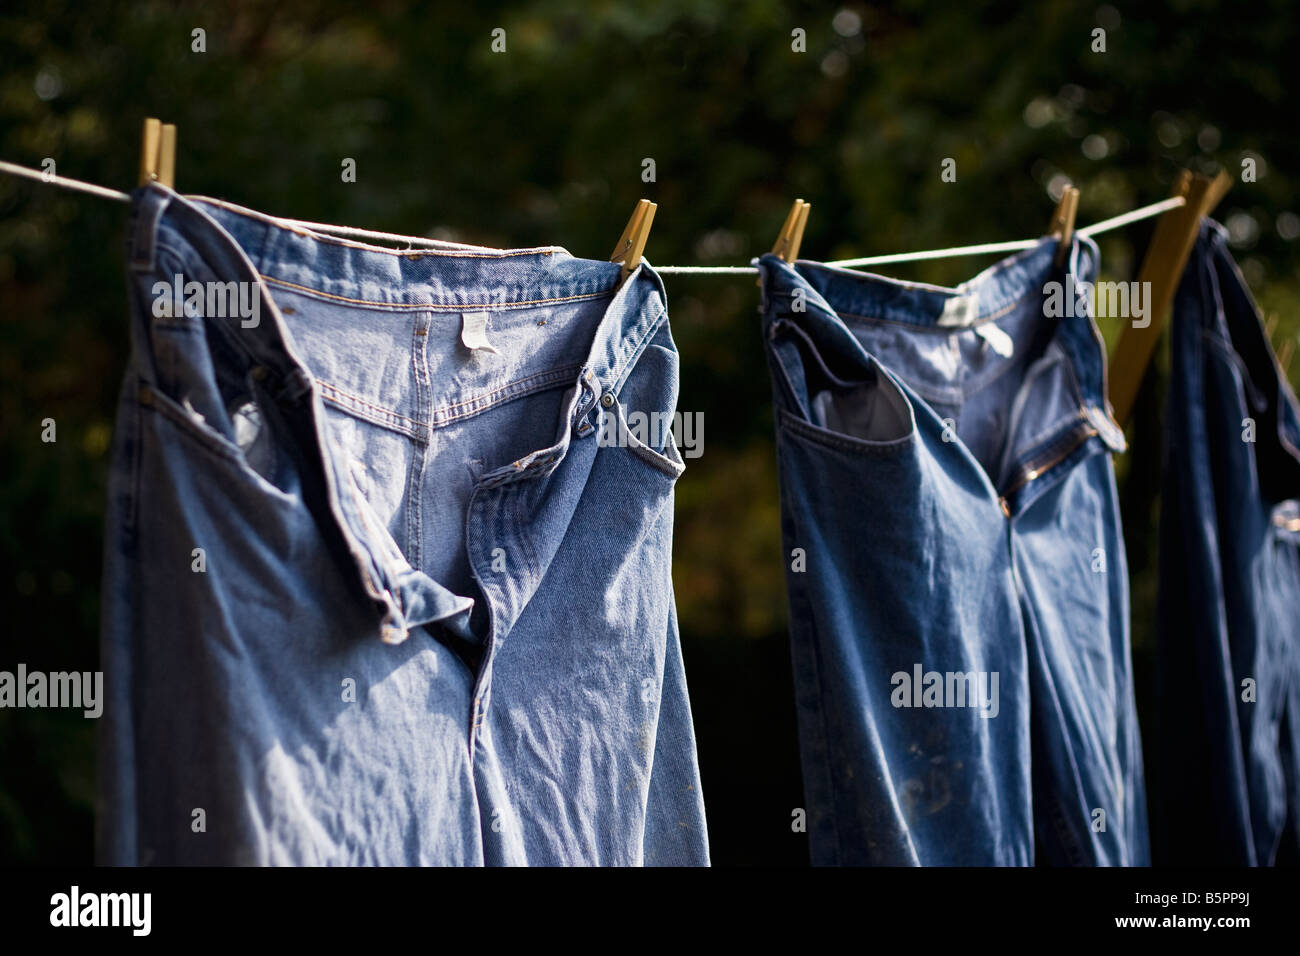 Blue jeans hanging on a clothesline. Stock Photo